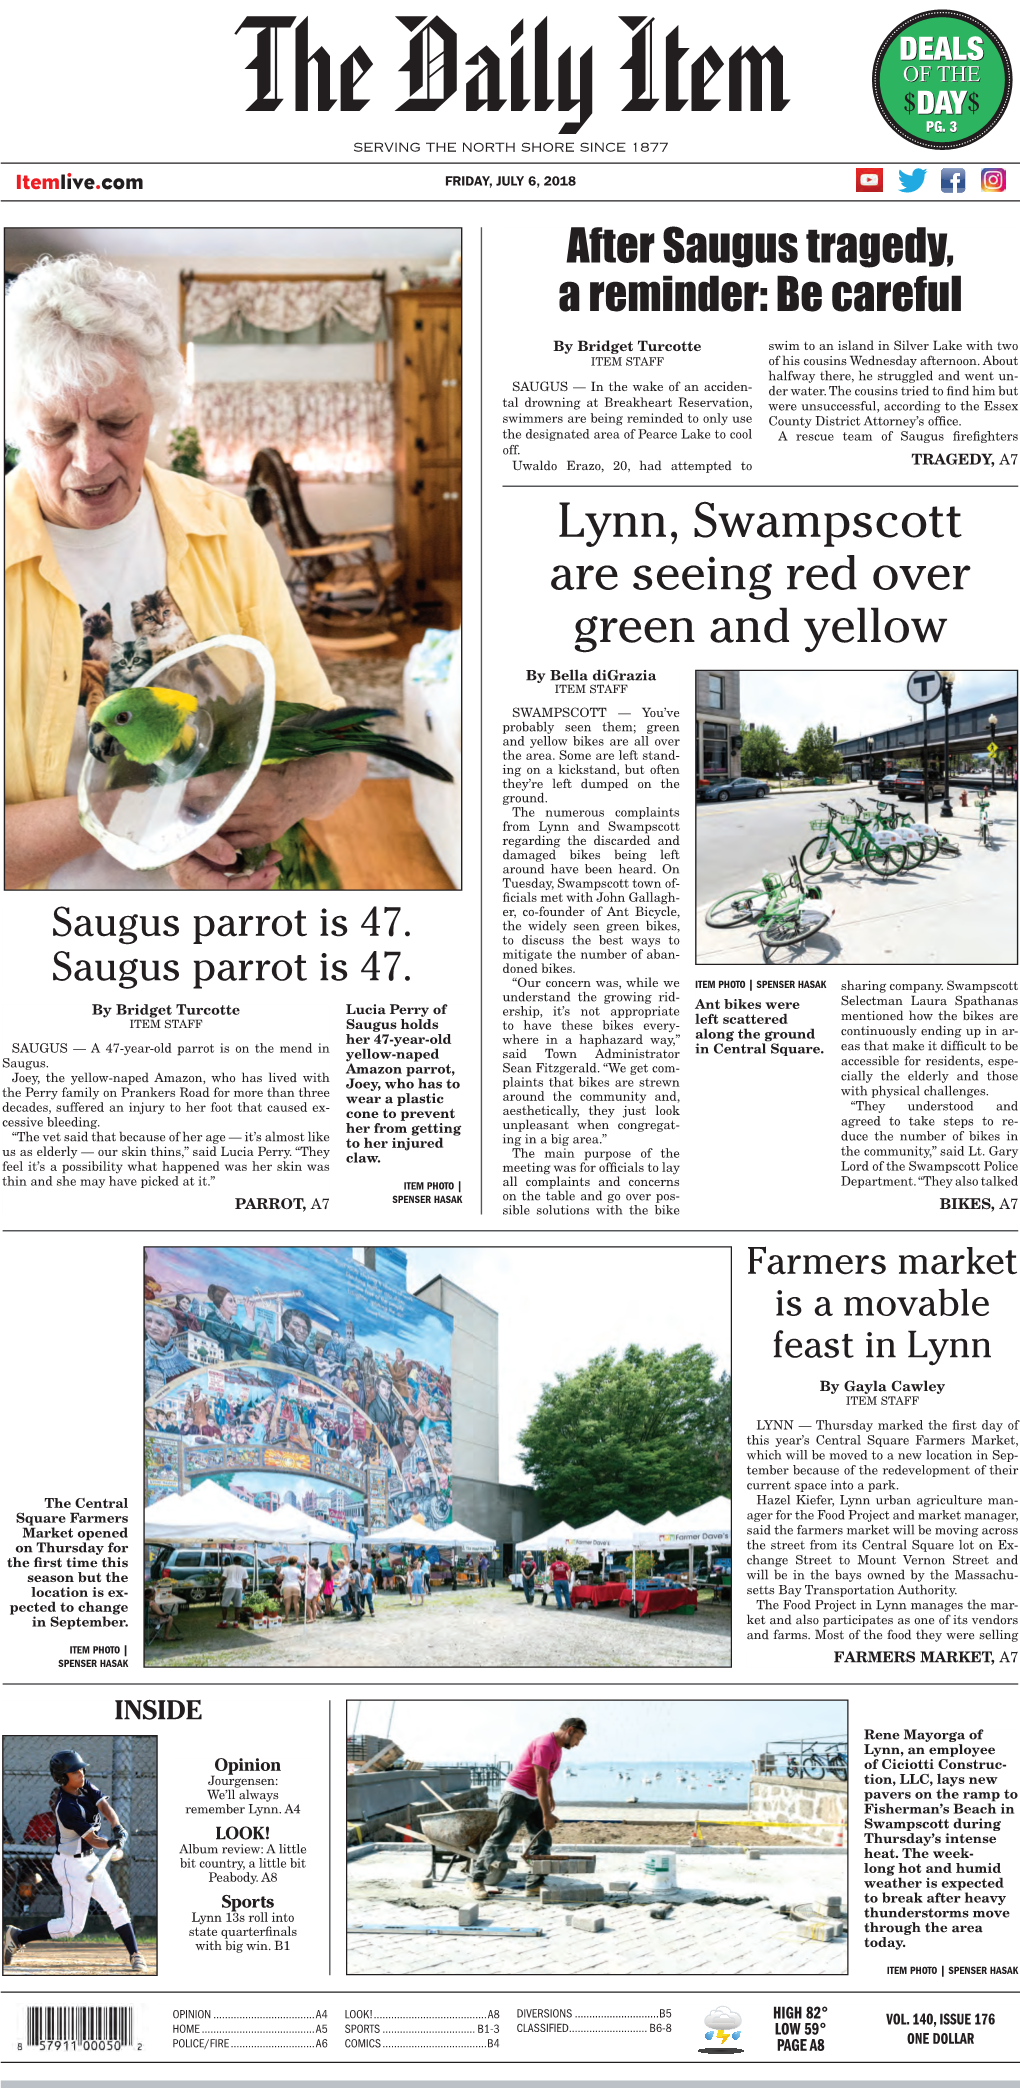 Lynn, Swampscott Are Seeing Red Over Green and Yellow